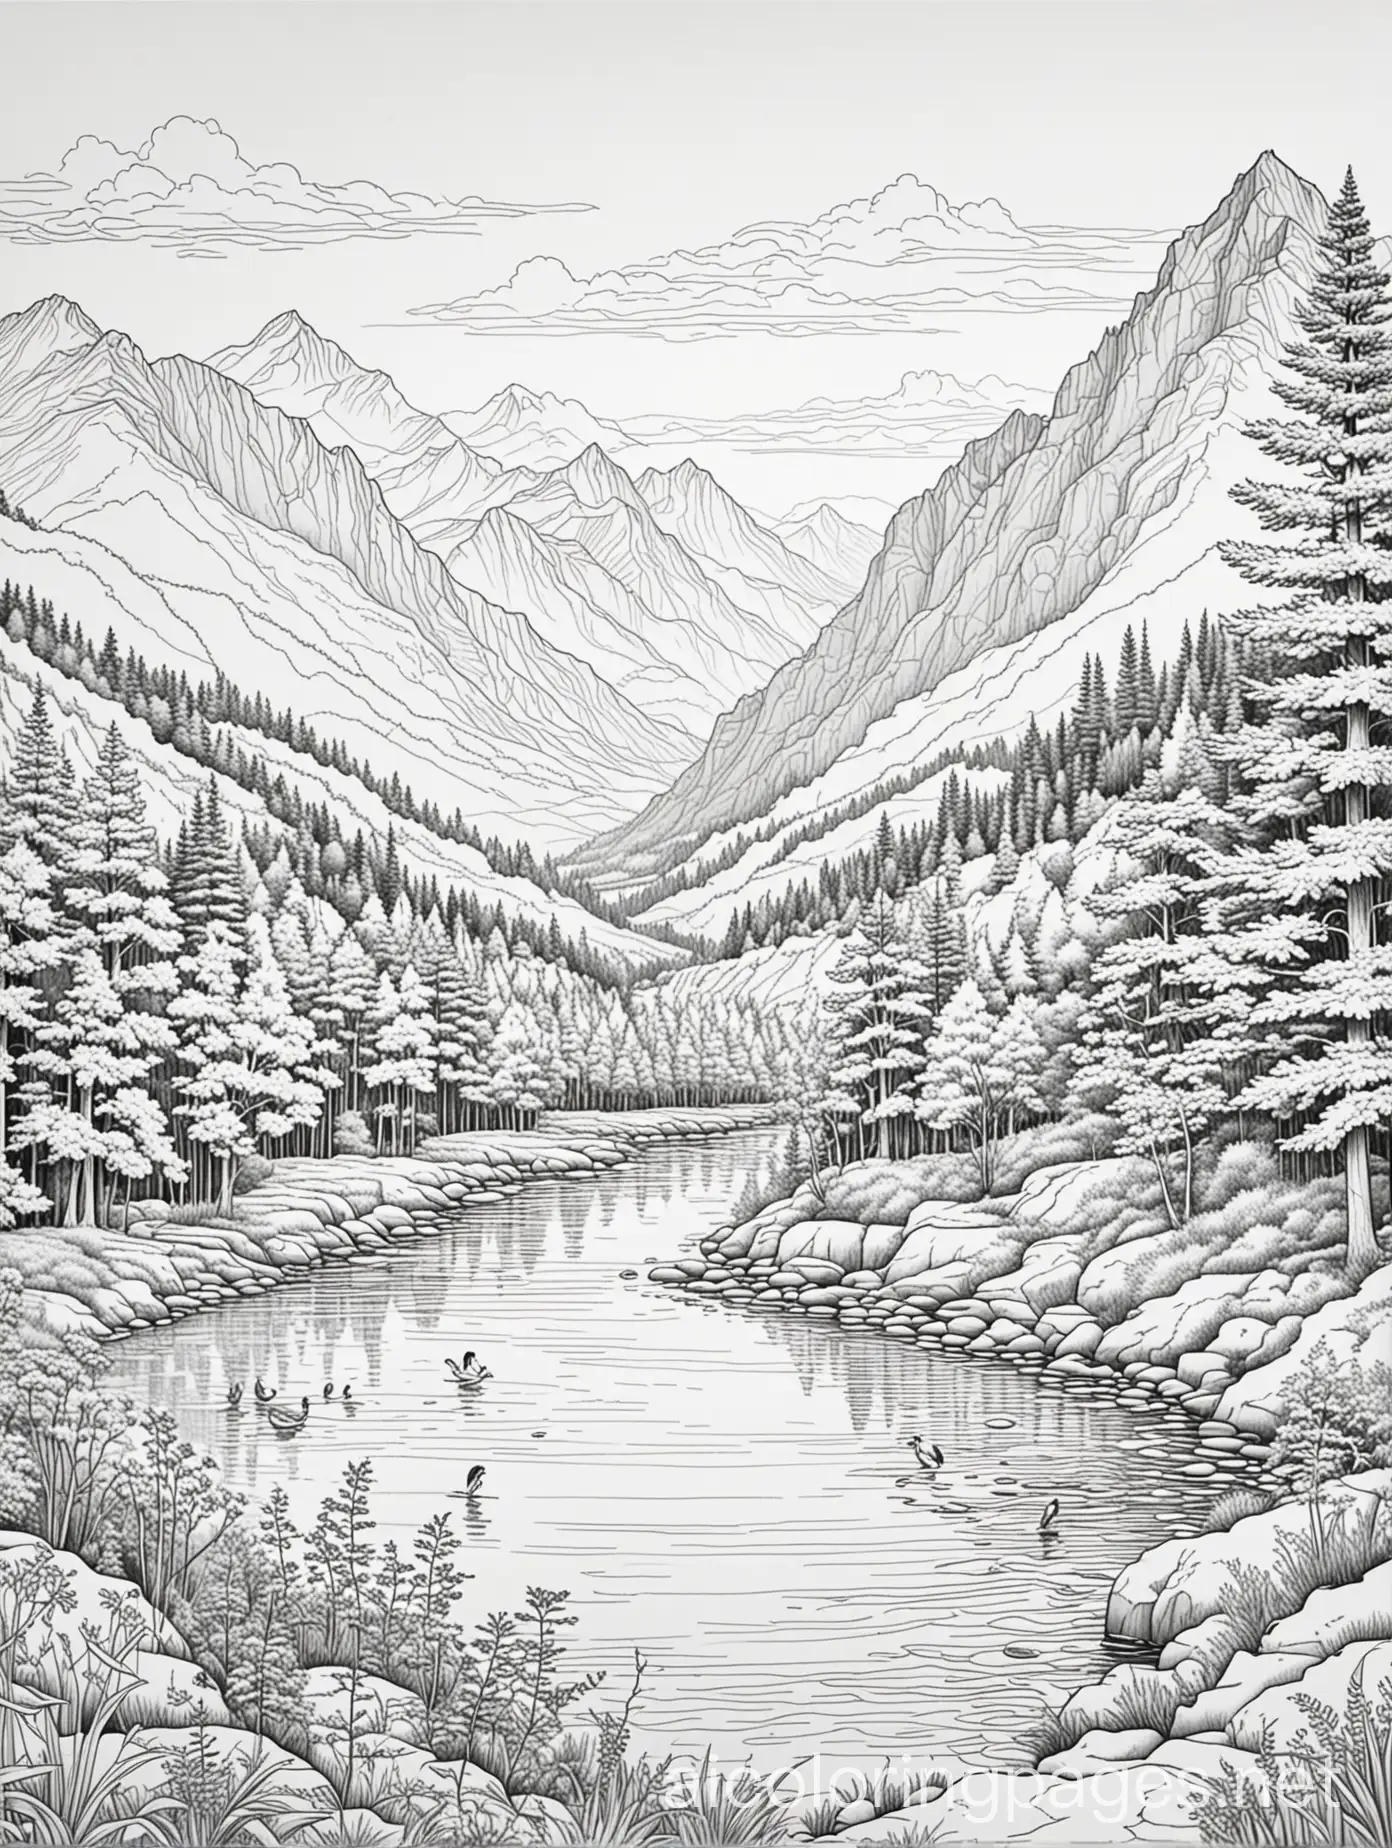 Nature based element, panorama or view, black and white for coloring, bit detailed drawing for adults, can be birds, trees, river, mountain and so on
, Coloring Page, black and white, line art, white background, Simplicity, Ample White Space. The background of the coloring page is plain white to make it easy for young children to color within the lines. The outlines of all the subjects are easy to distinguish, making it simple for kids to color without too much difficulty